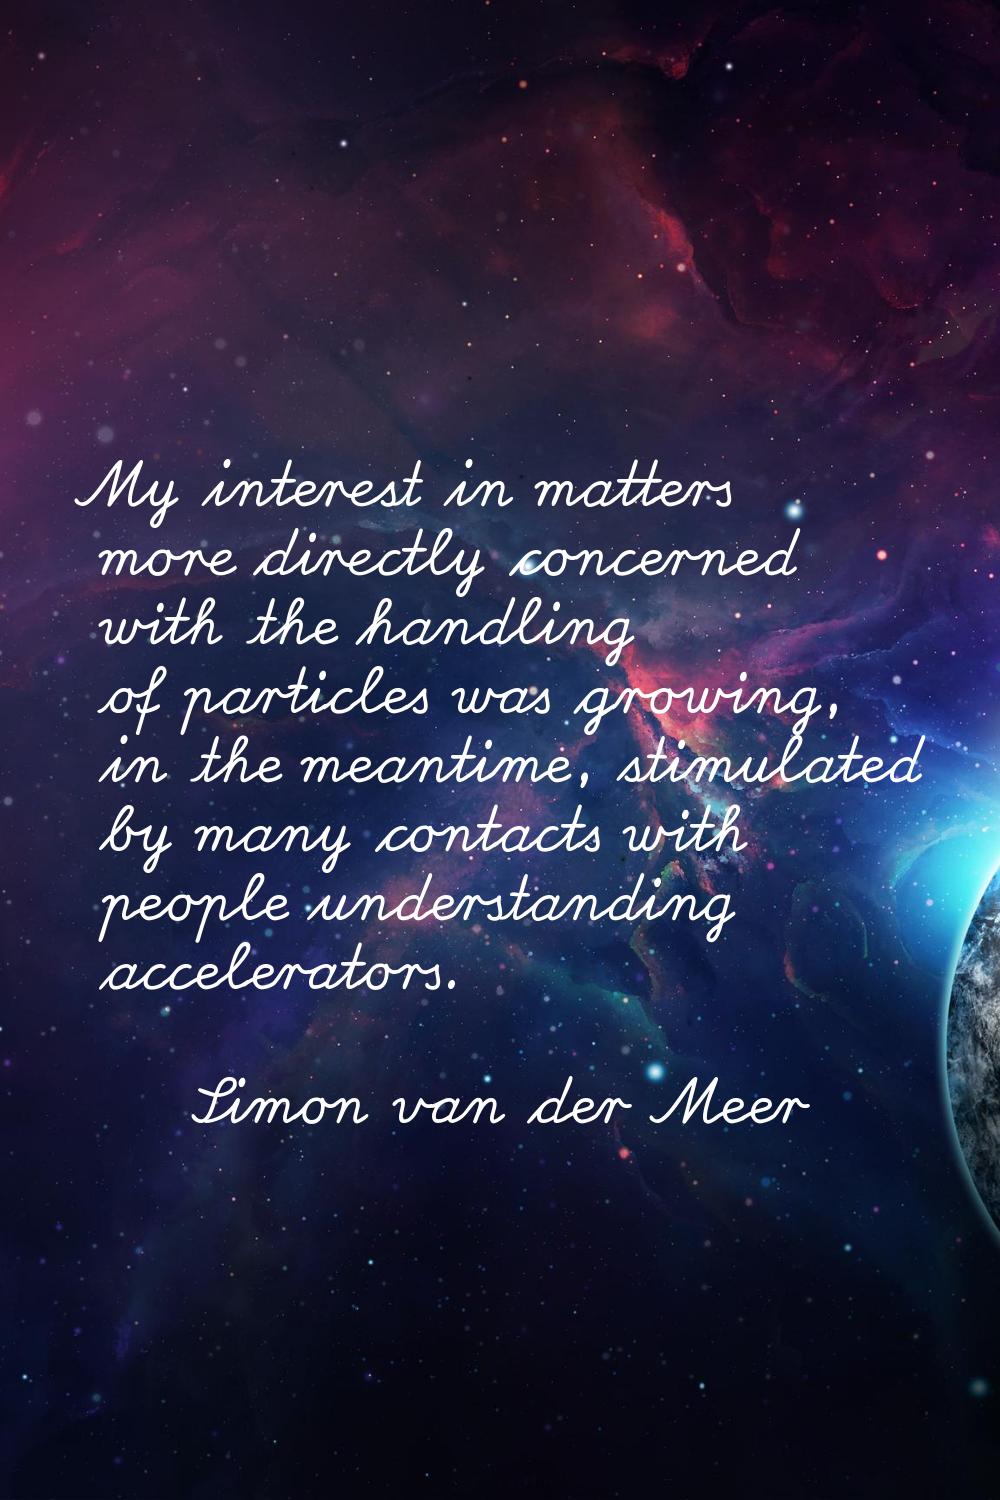 My interest in matters more directly concerned with the handling of particles was growing, in the m